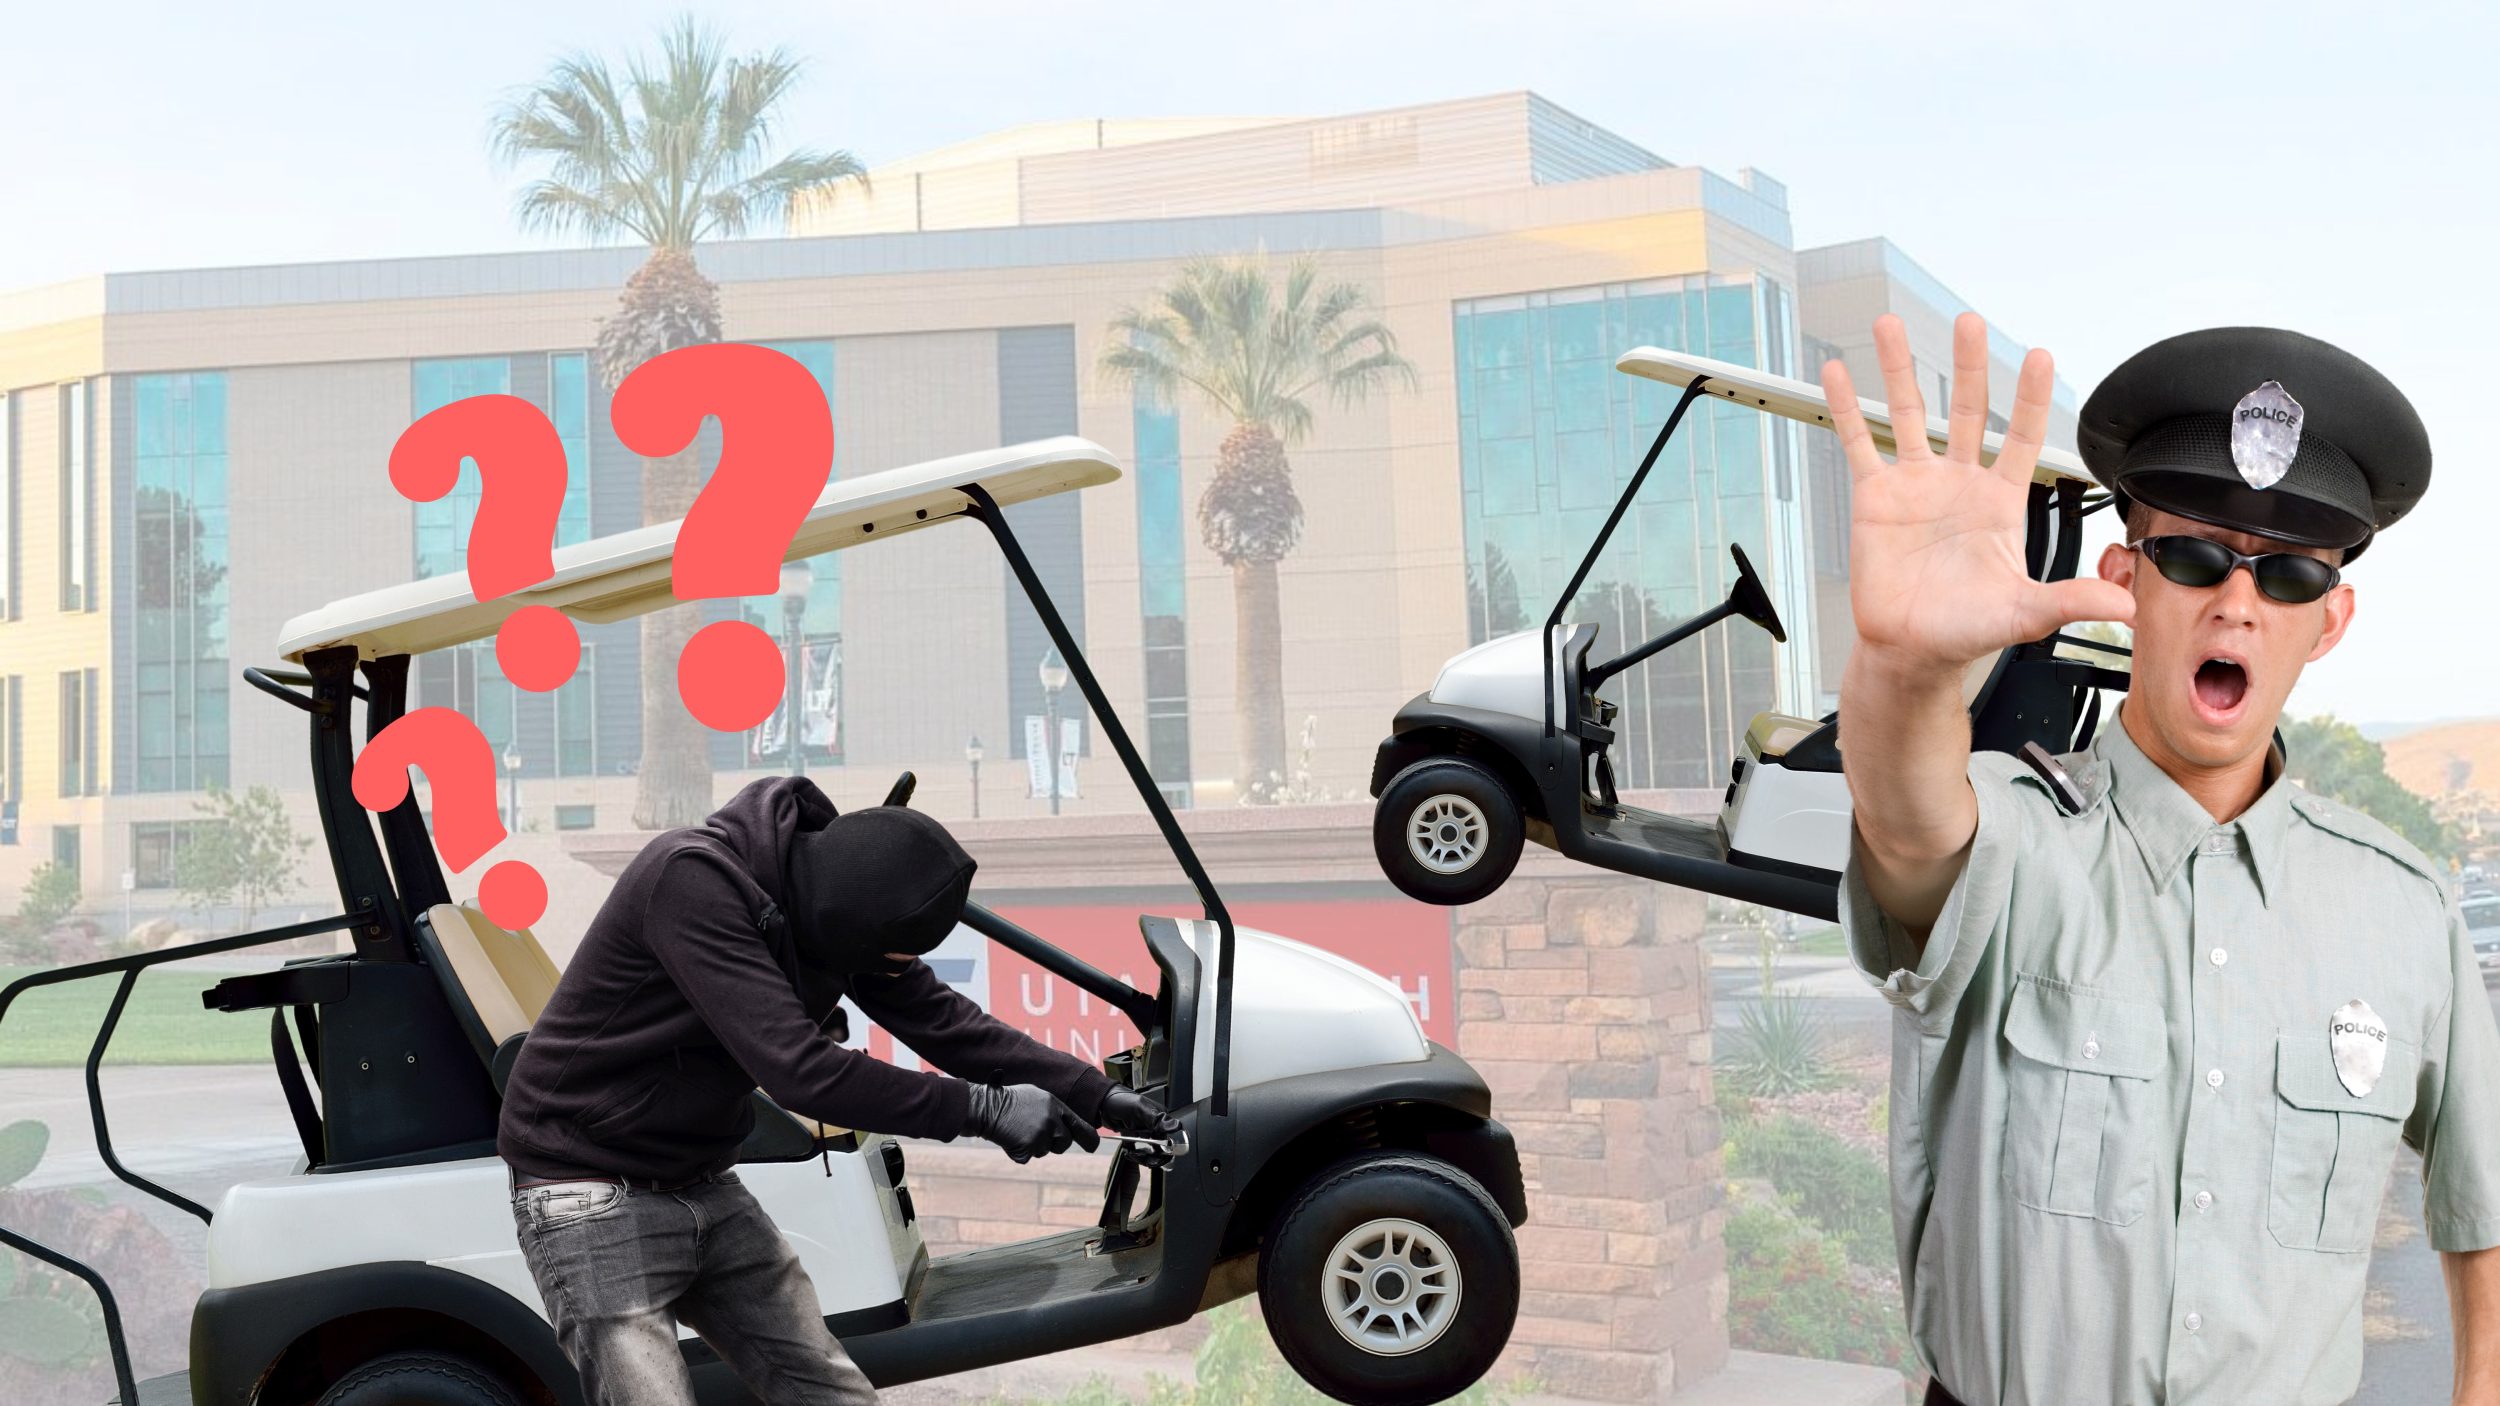 Tracking devices will be installed on Utah Tech golf carts because of recent theft